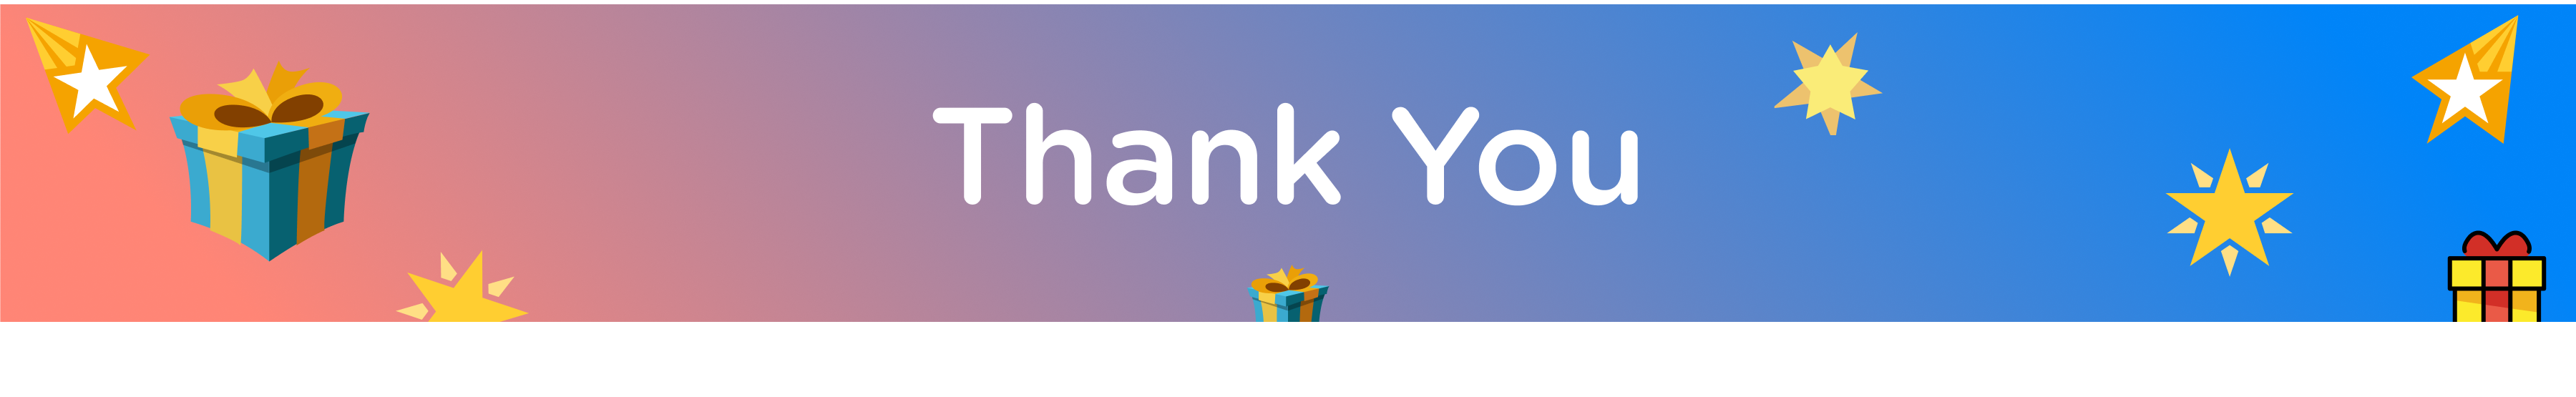 Thank-You-Banner